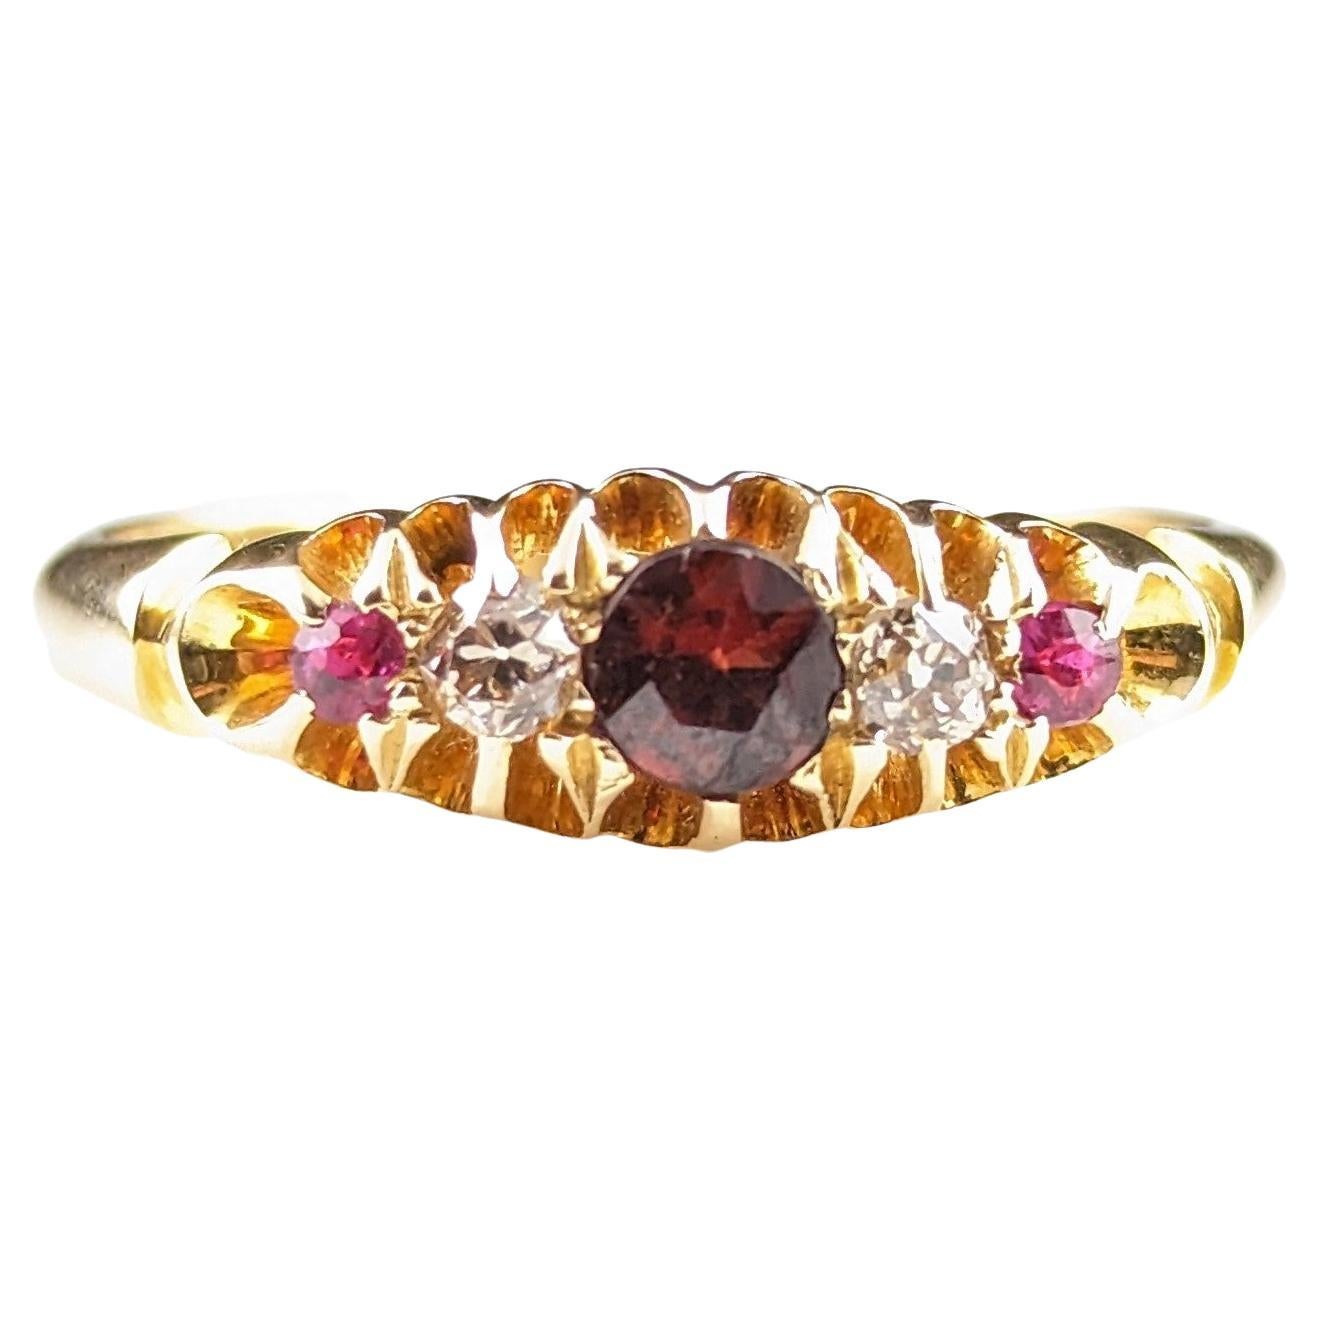 Antique Garnet, Ruby and Diamond Ring, 18ct Gold